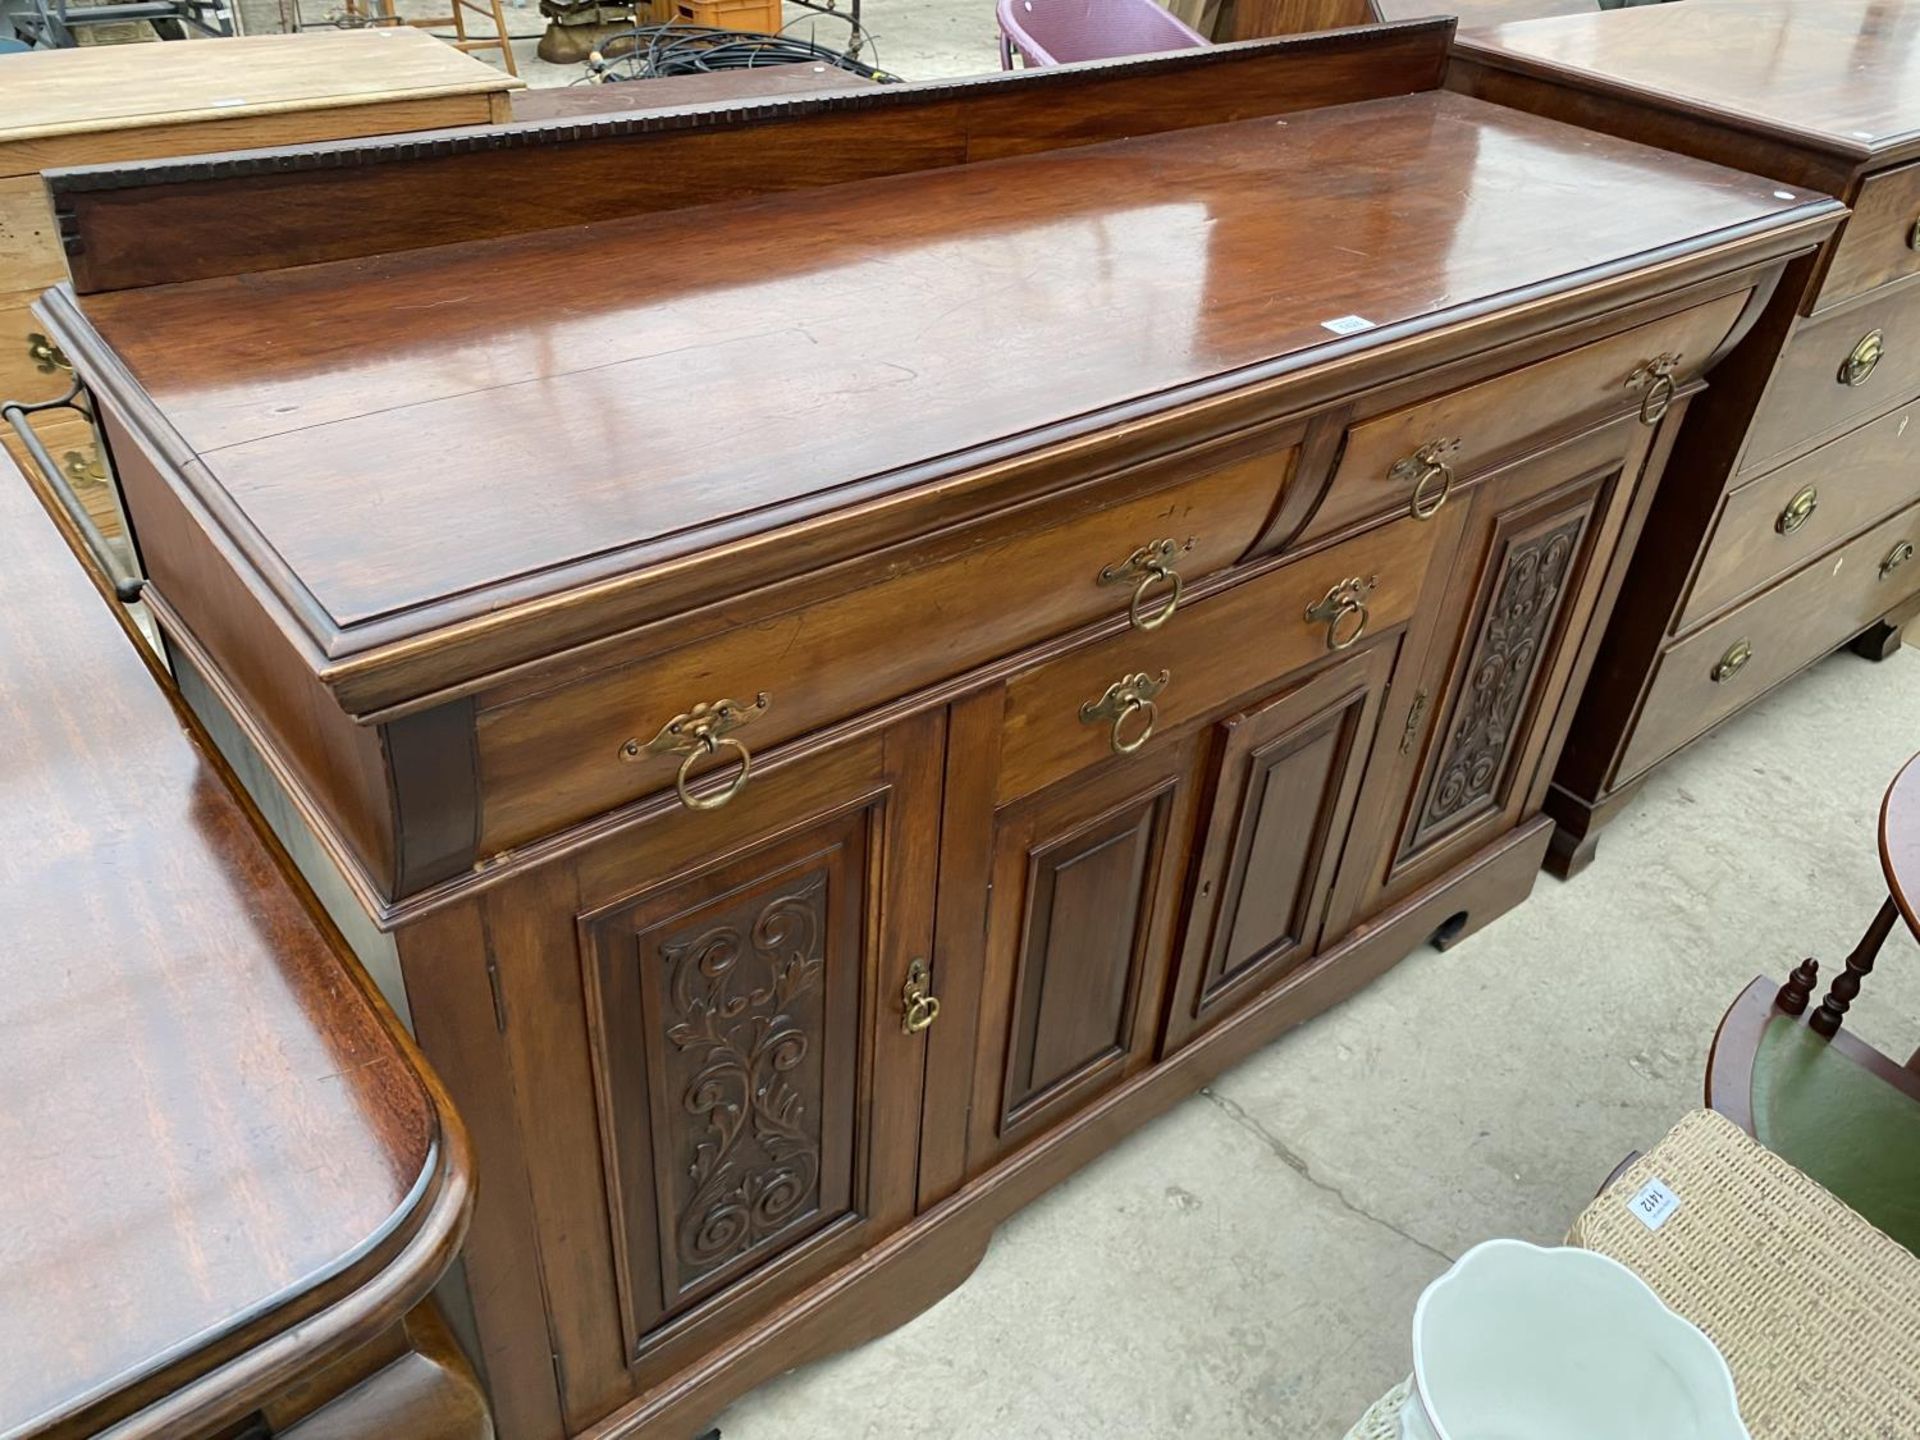 A MAHOGANY SIDEBOARD WITH FOUR DOORS AND THREE DRAWERS